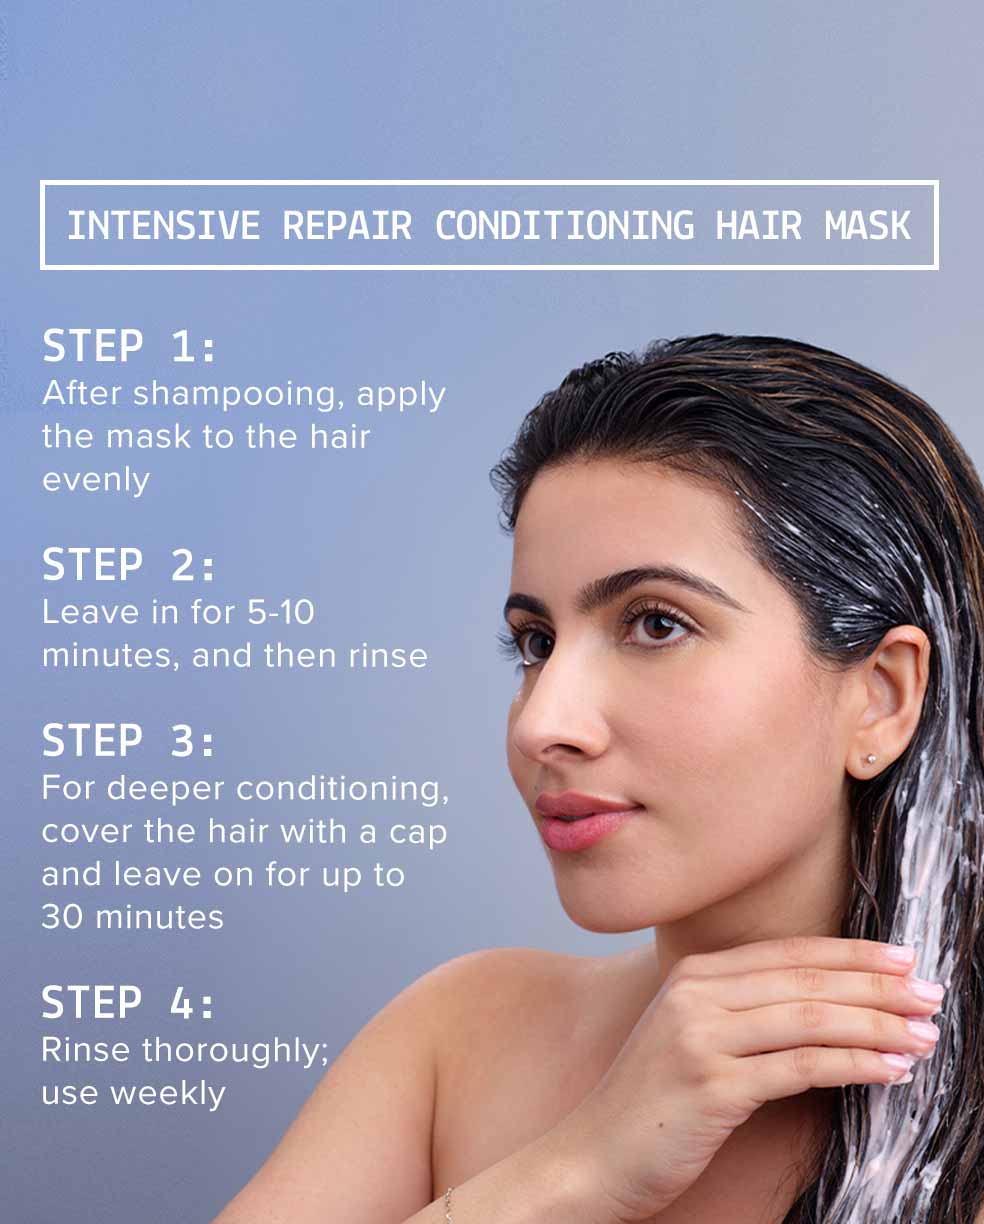 AAVRANI Intensive Repair Conditioning Hair Mask  how to use infographic